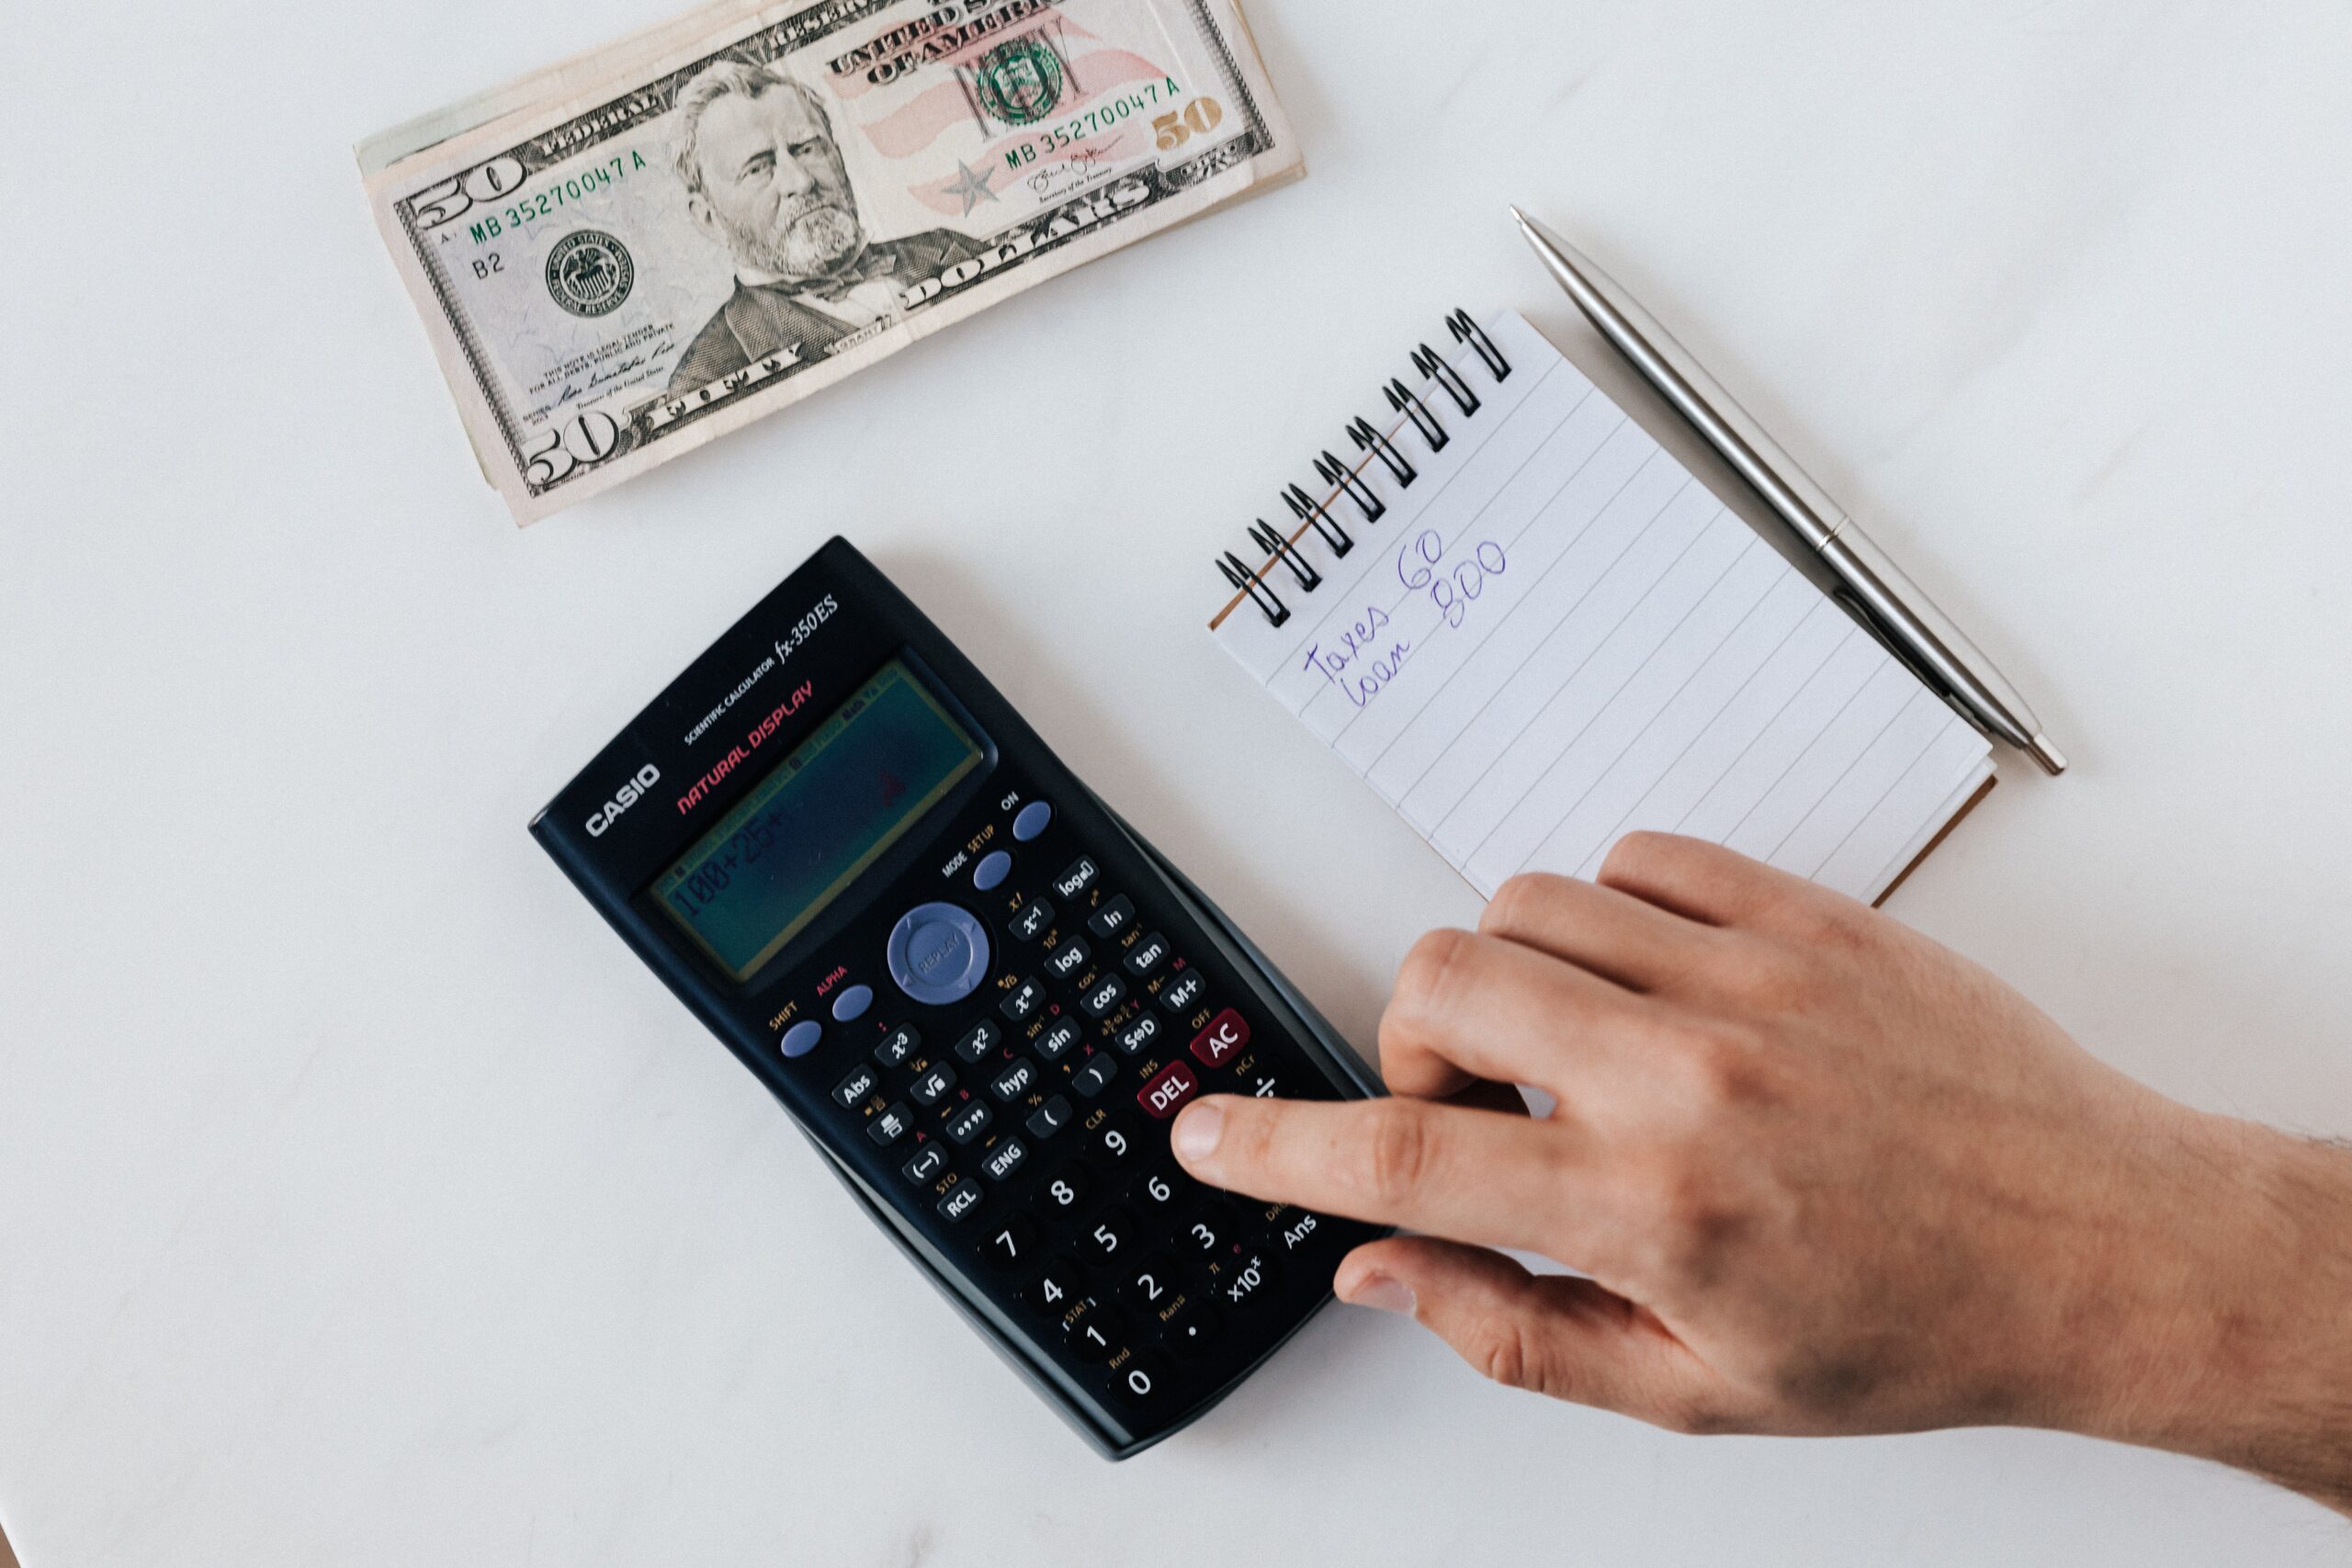 Capital Budgeting and Investment Decision Making. Image Credit (Pexels)